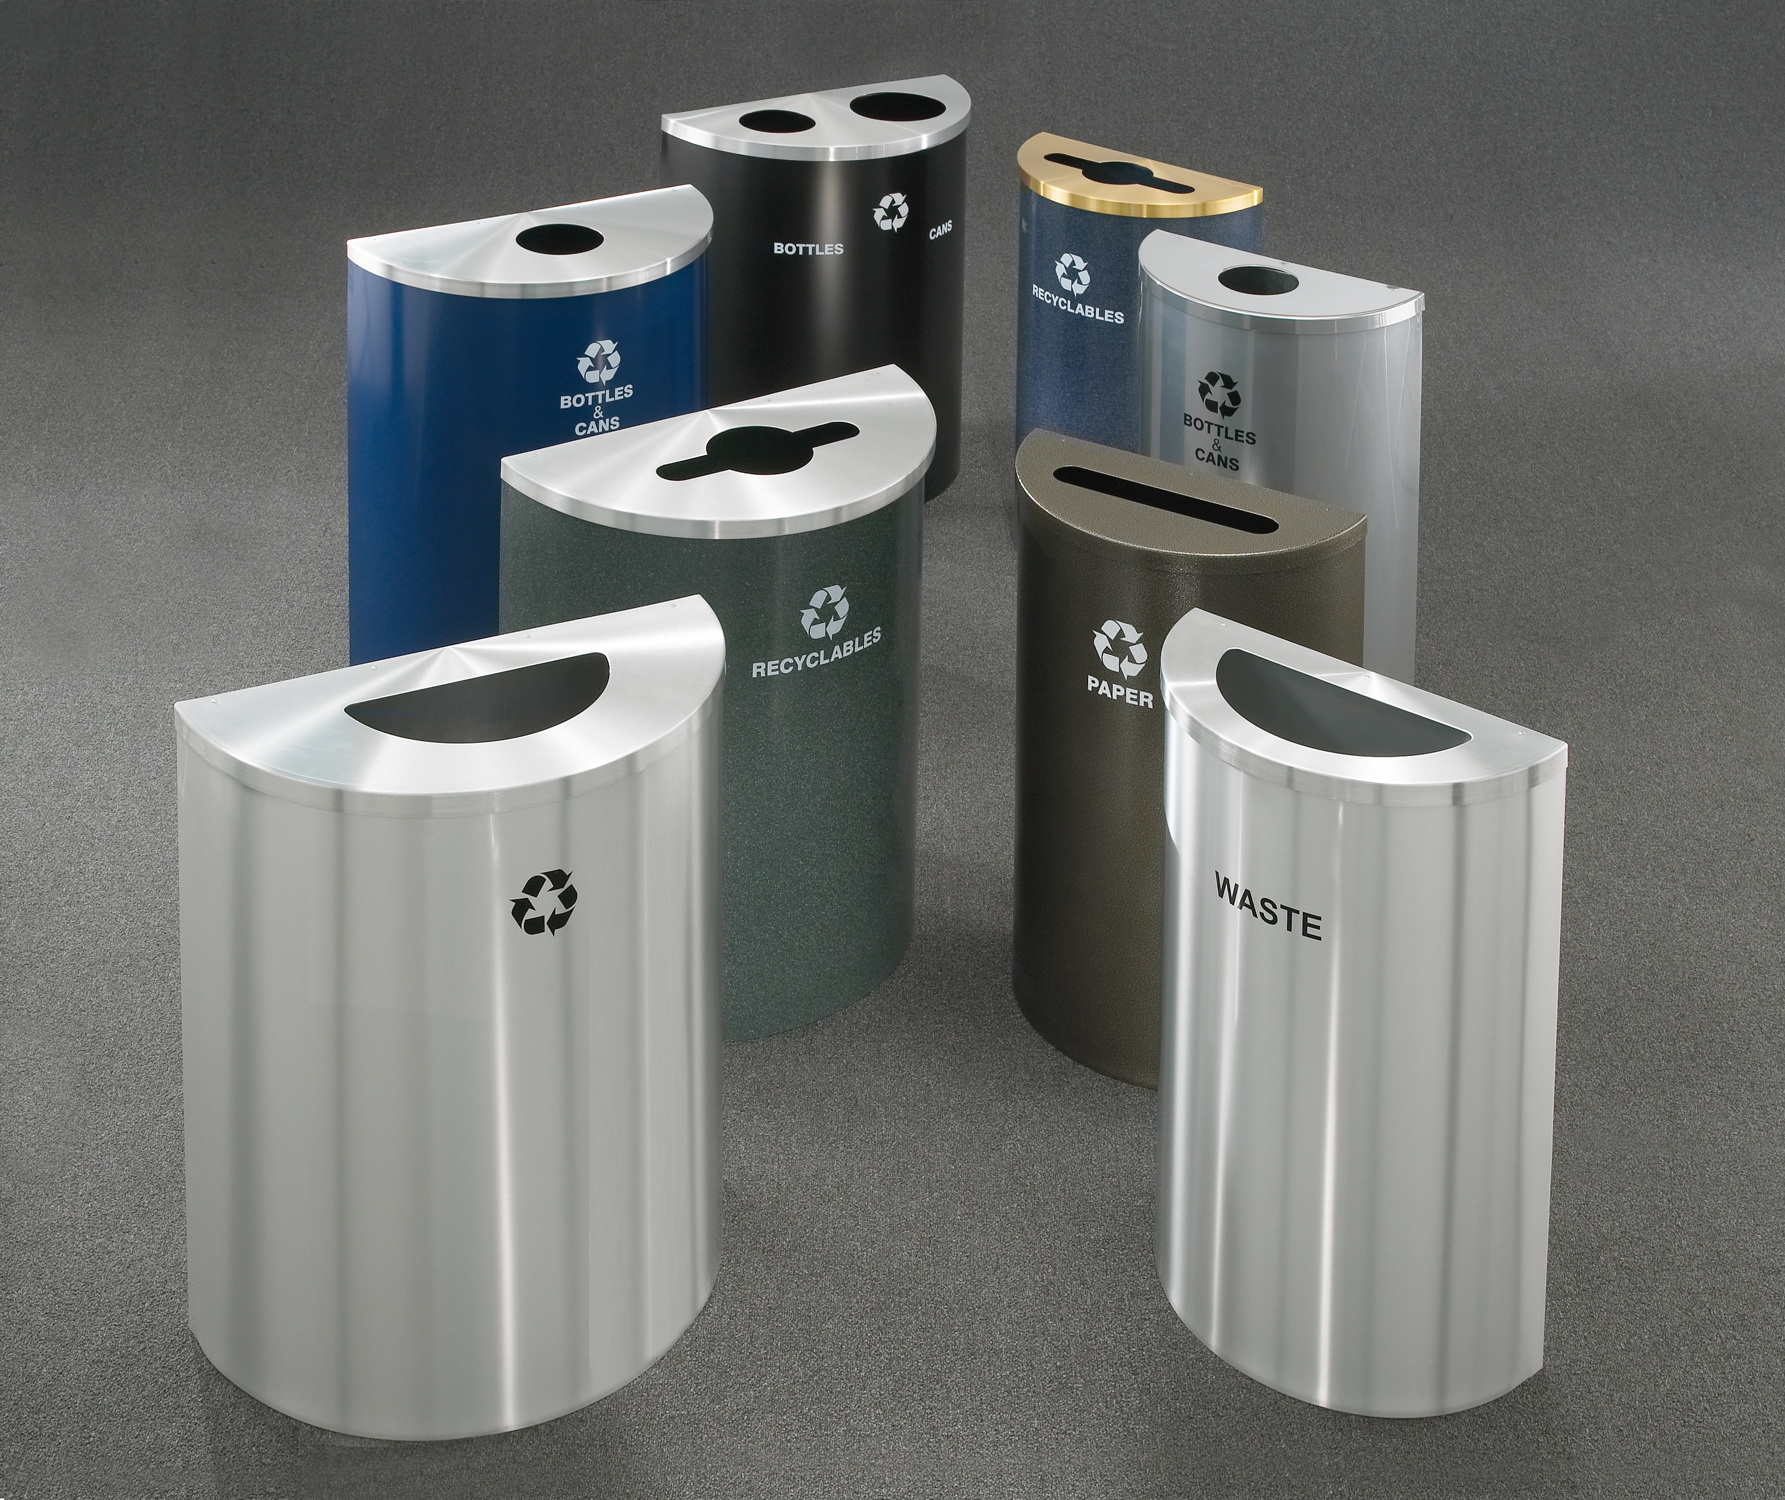 18-inch-and-24-inch-half-round-recycling-trash-cans.jpg